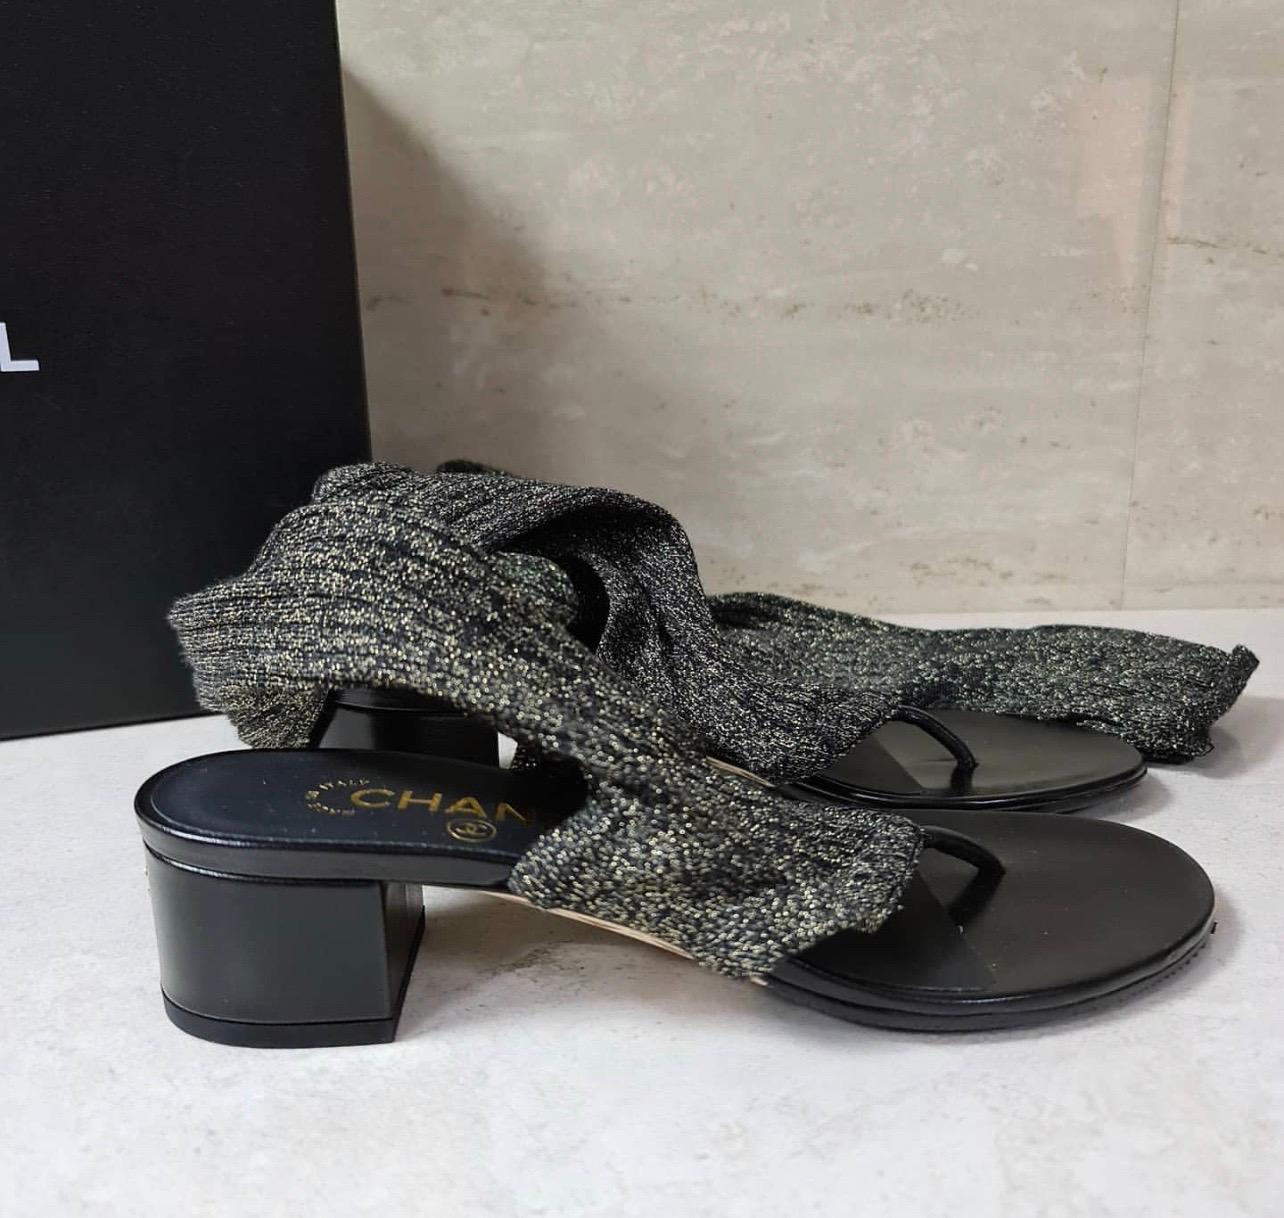 Details:

- Elasticized ribbed black/gold metallic textile over-the-knee socks.

- Black leather thong sandal.

- Self covered heel.

- Gold-tone metal CC logo at back of heel.

- Leather insole and sole.

Sz 38

Condition is excellent.

No original